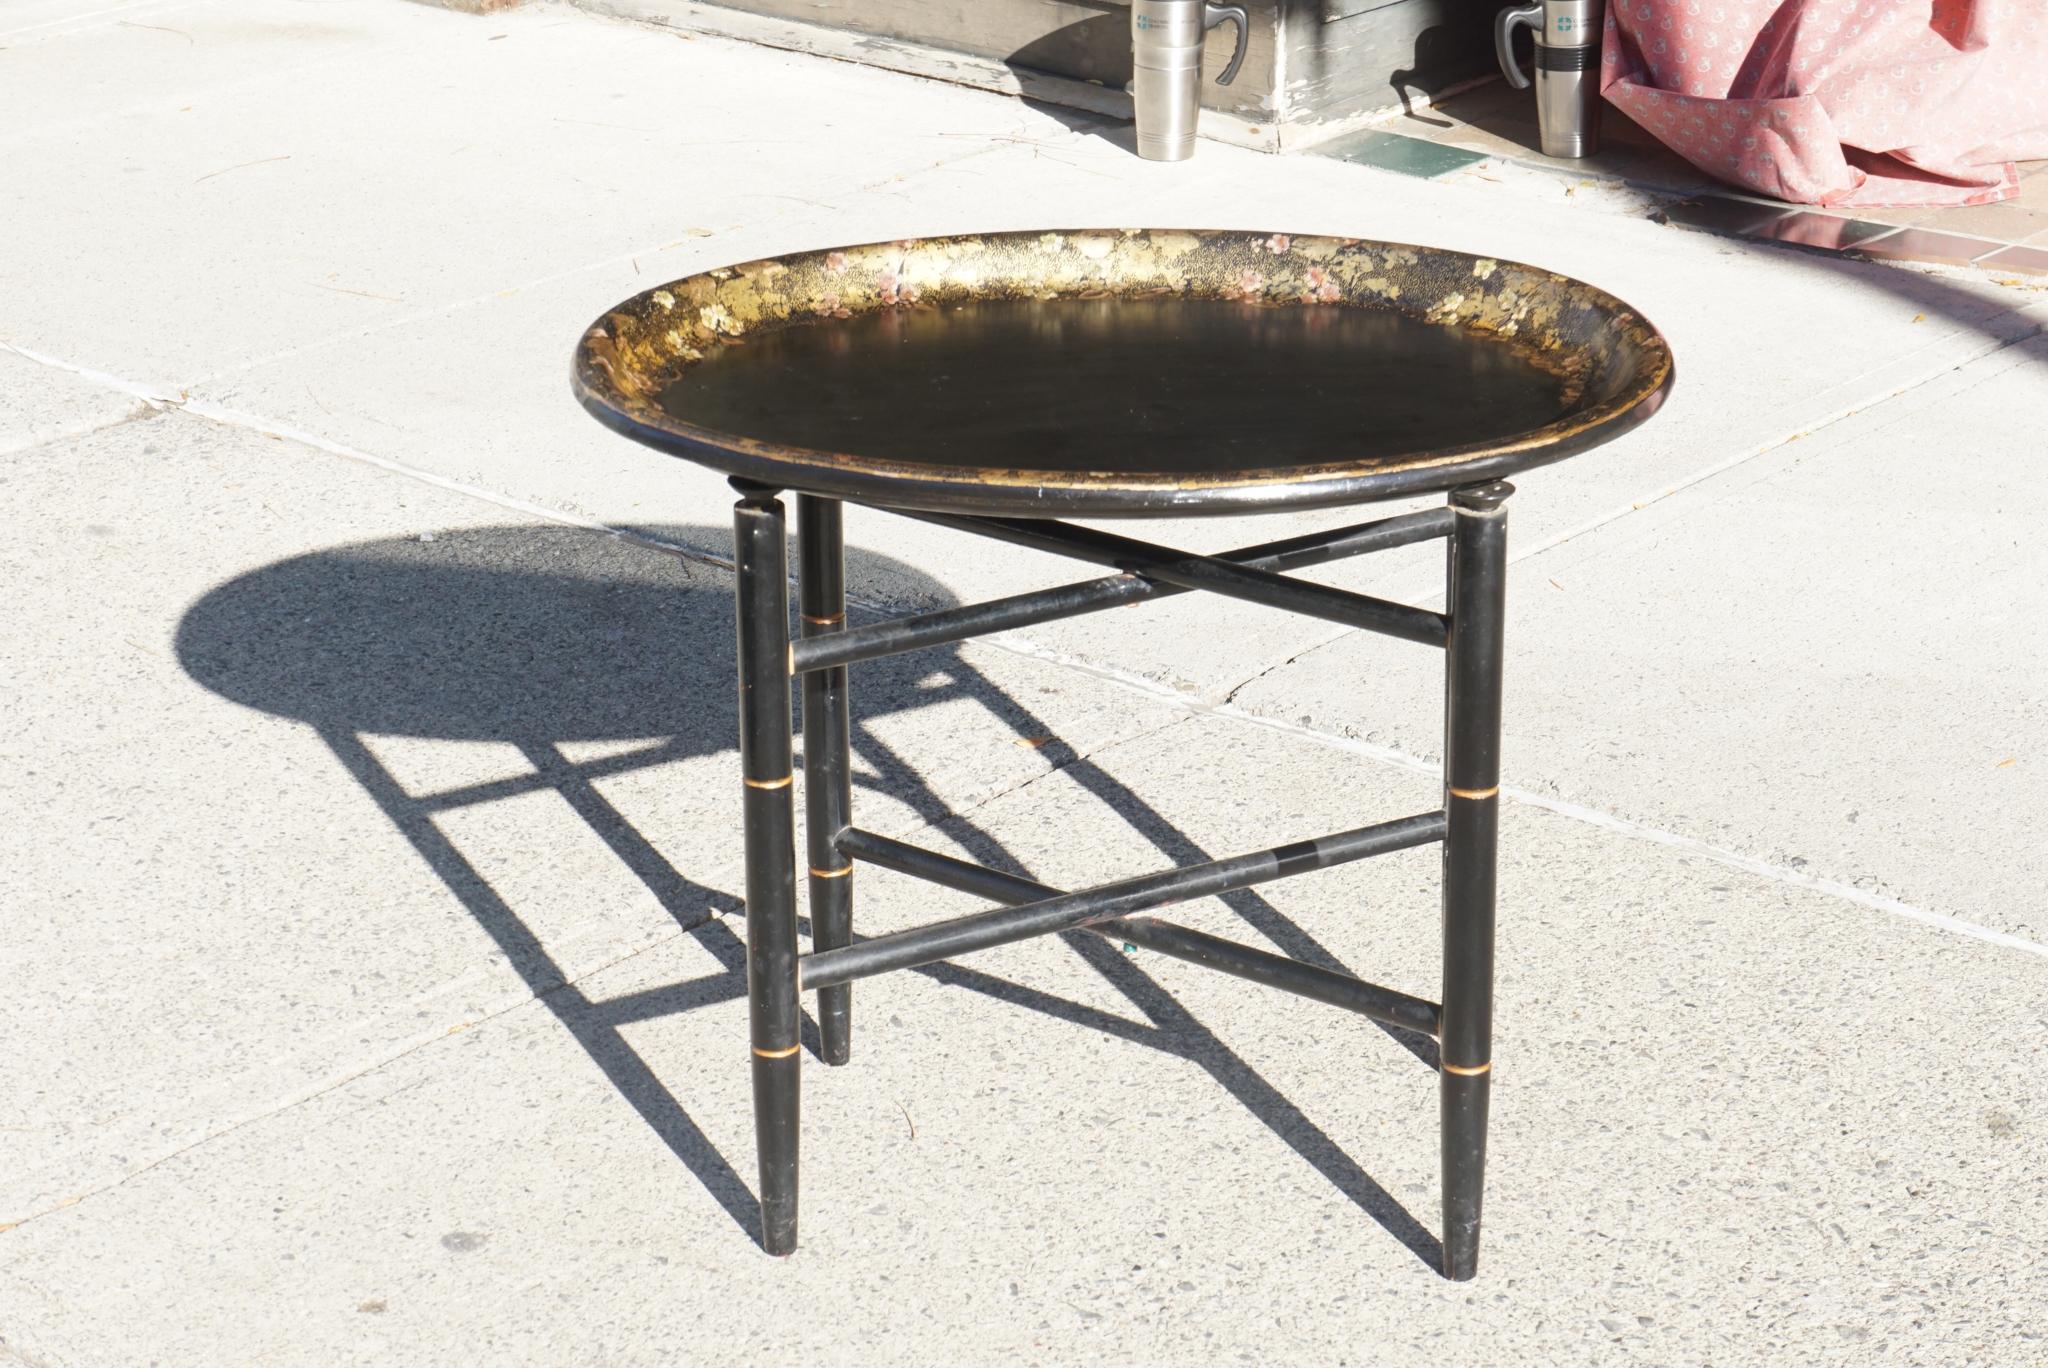 This very nice old papier-mache tray produced approx 1885 comes from England while the stand is a modern addition creating a useful and attractive small coffee table. The base is made to imitate bamboo and is lacquered black with gilded lines